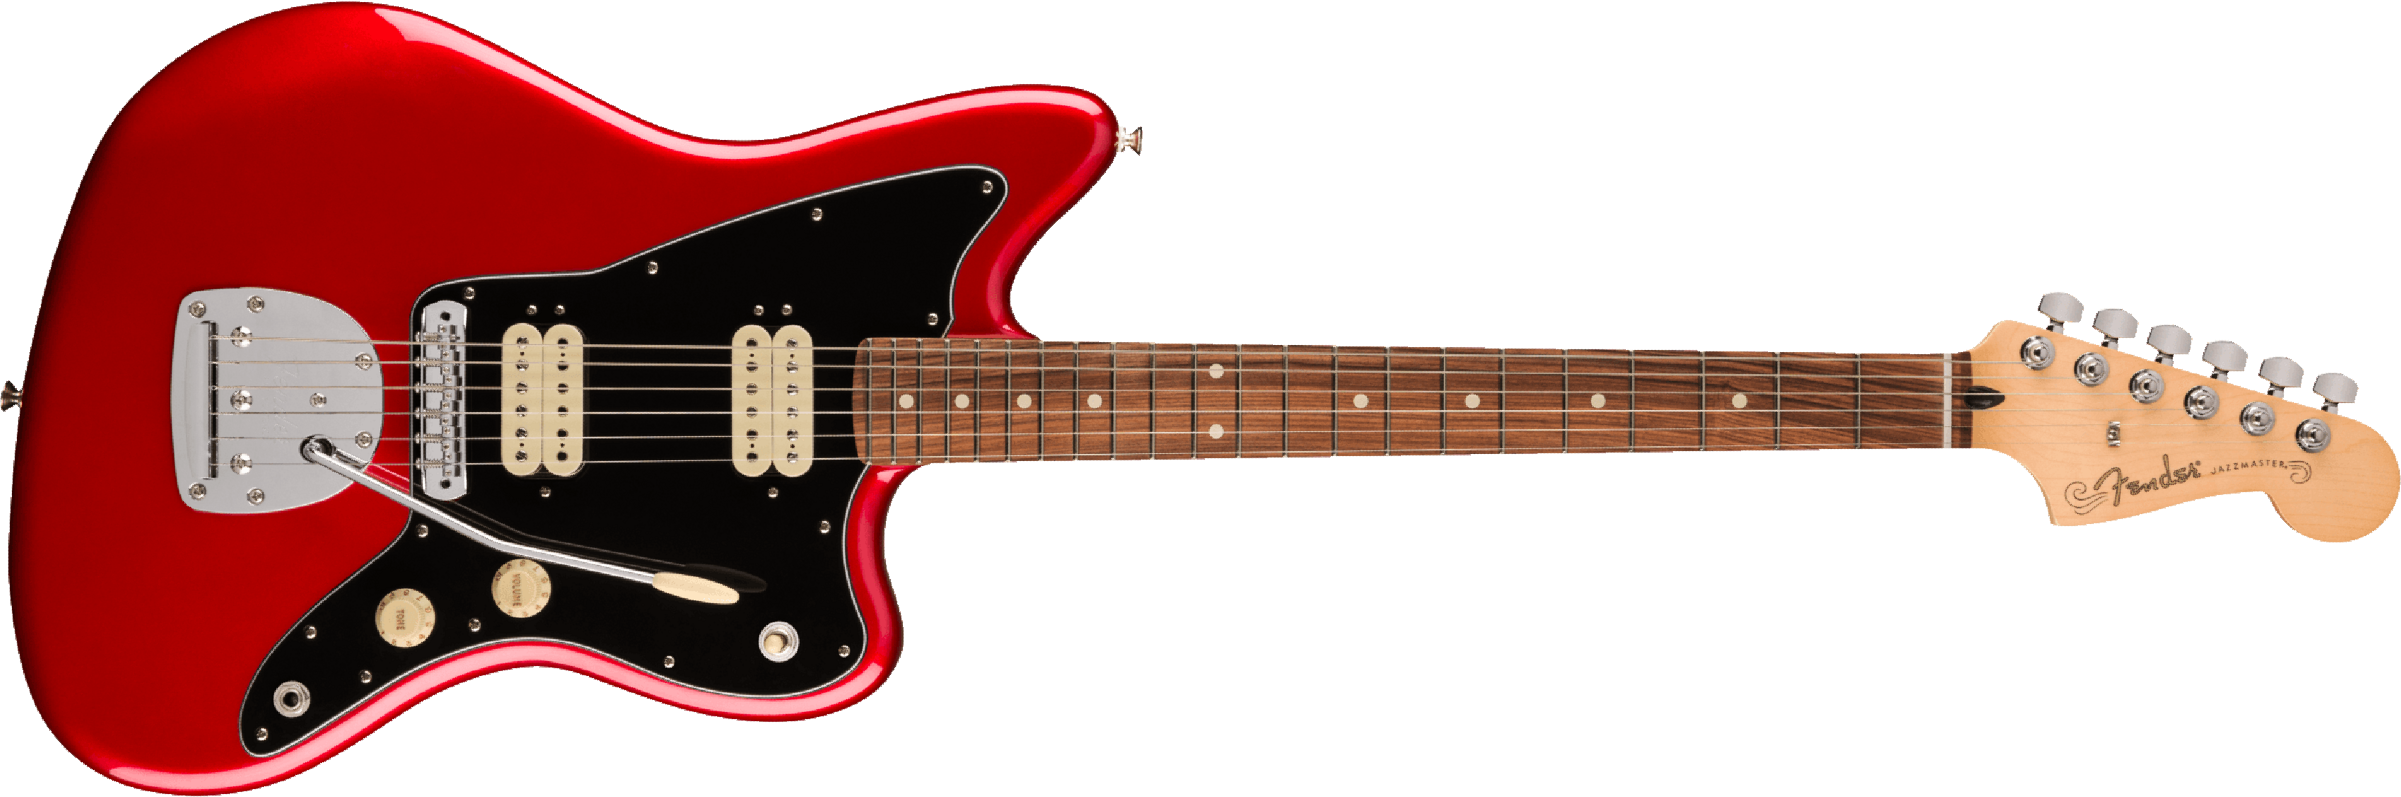 Fender Jazzmaster Player Hh Mex 2023 Trem 2h Pf - Candy Apple Red - Retro rock electric guitar - Main picture